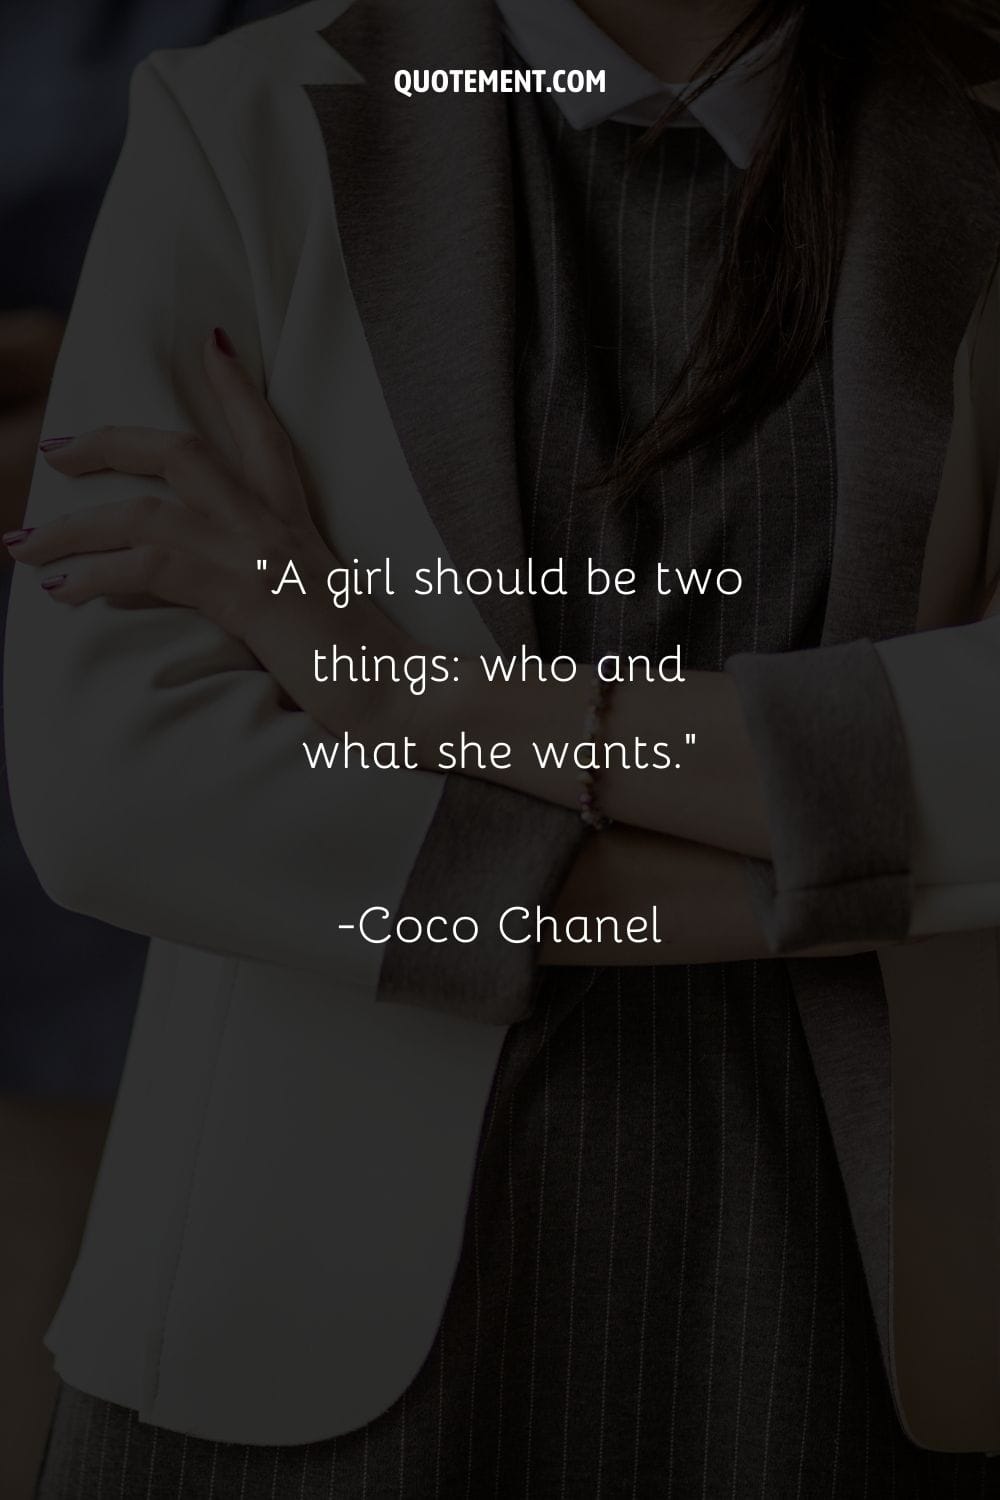 Image of a woman posing in a white suit representing sassy girl quote.